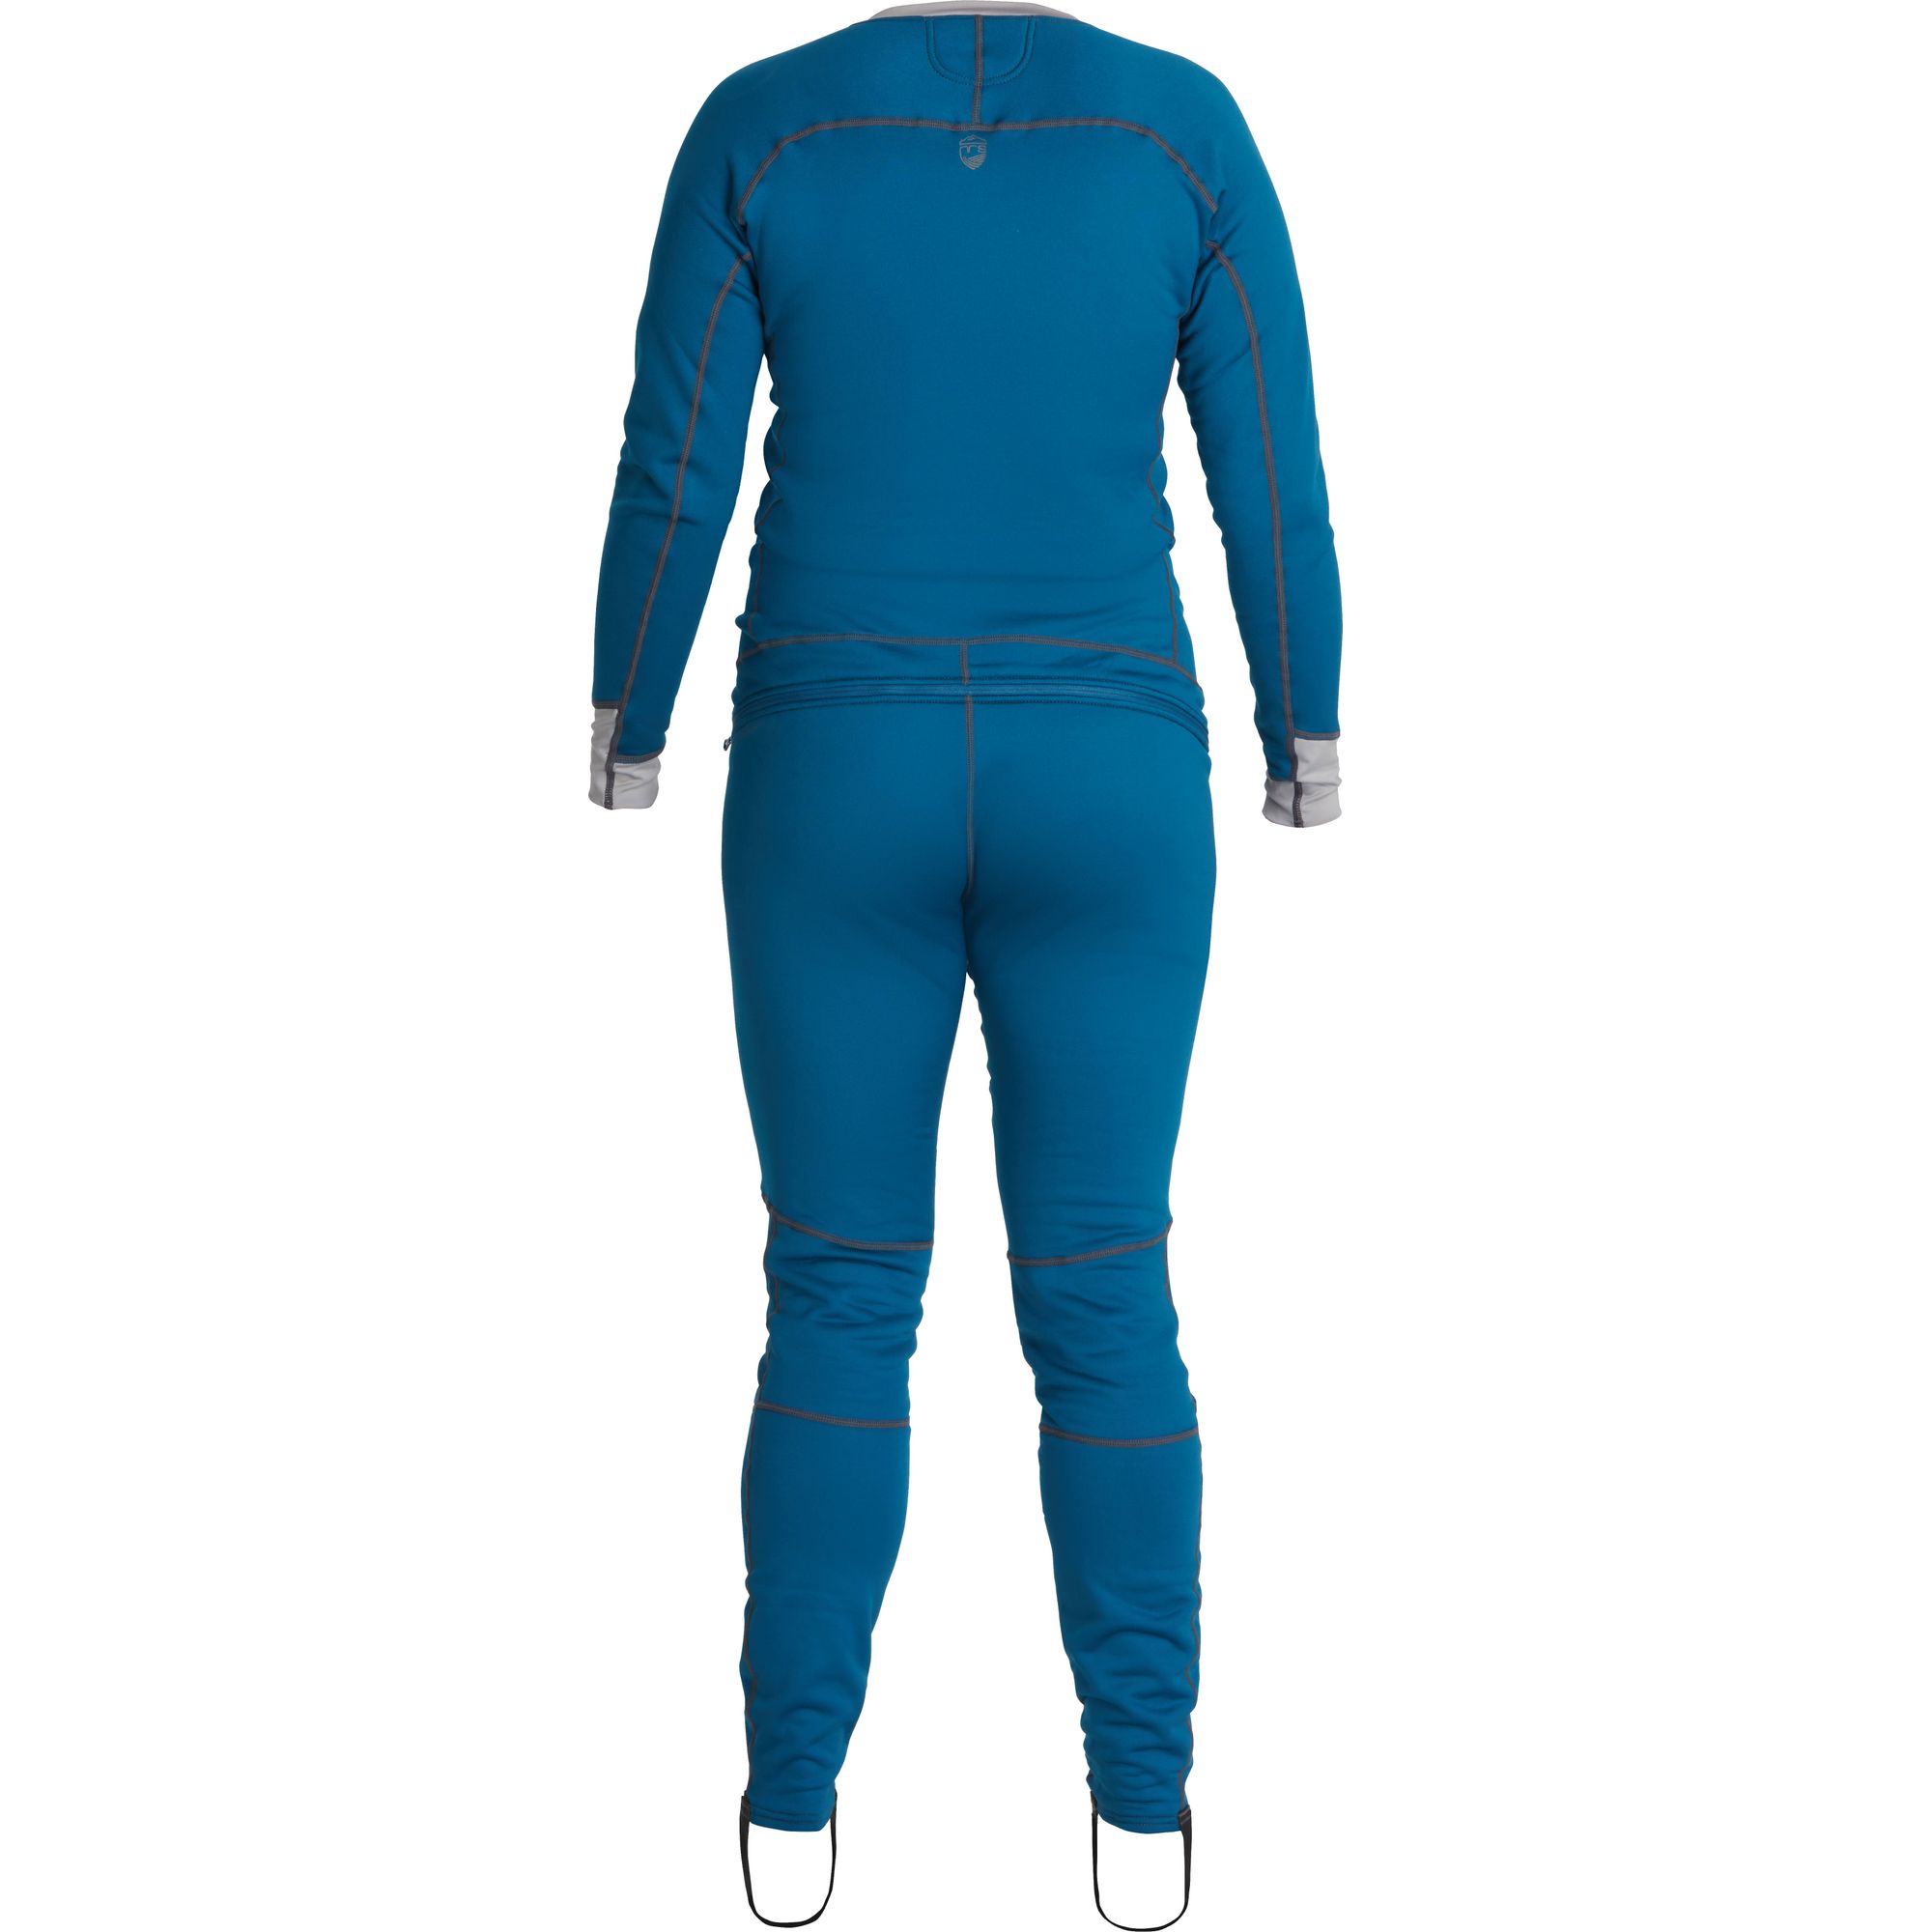 NRS Women's Expedition Weight Union Suit Fleece Anzug 